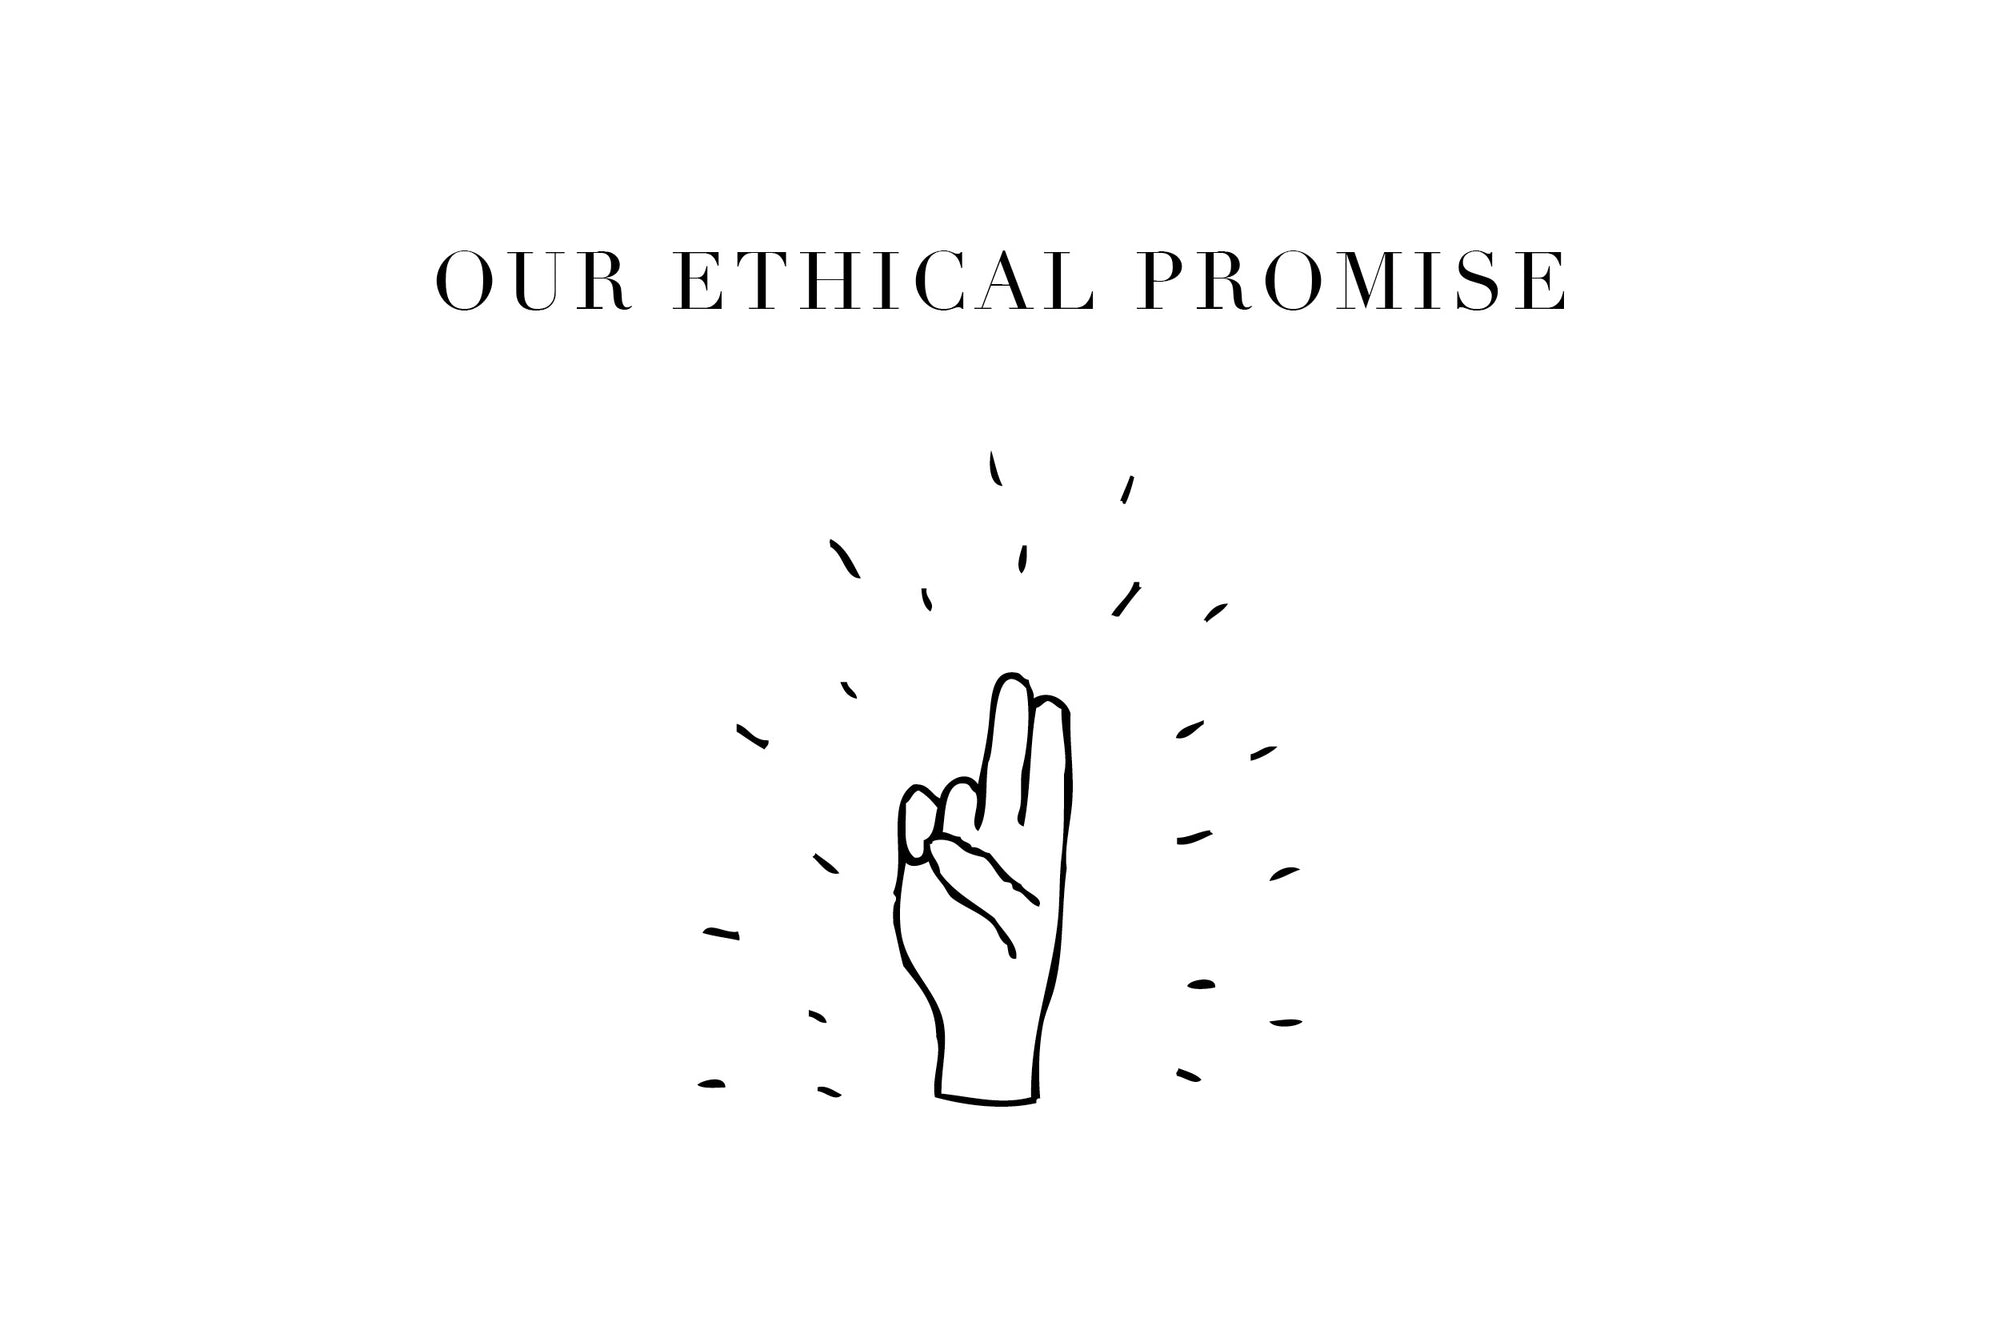 Audrey Claude Jewellery's ethical promise